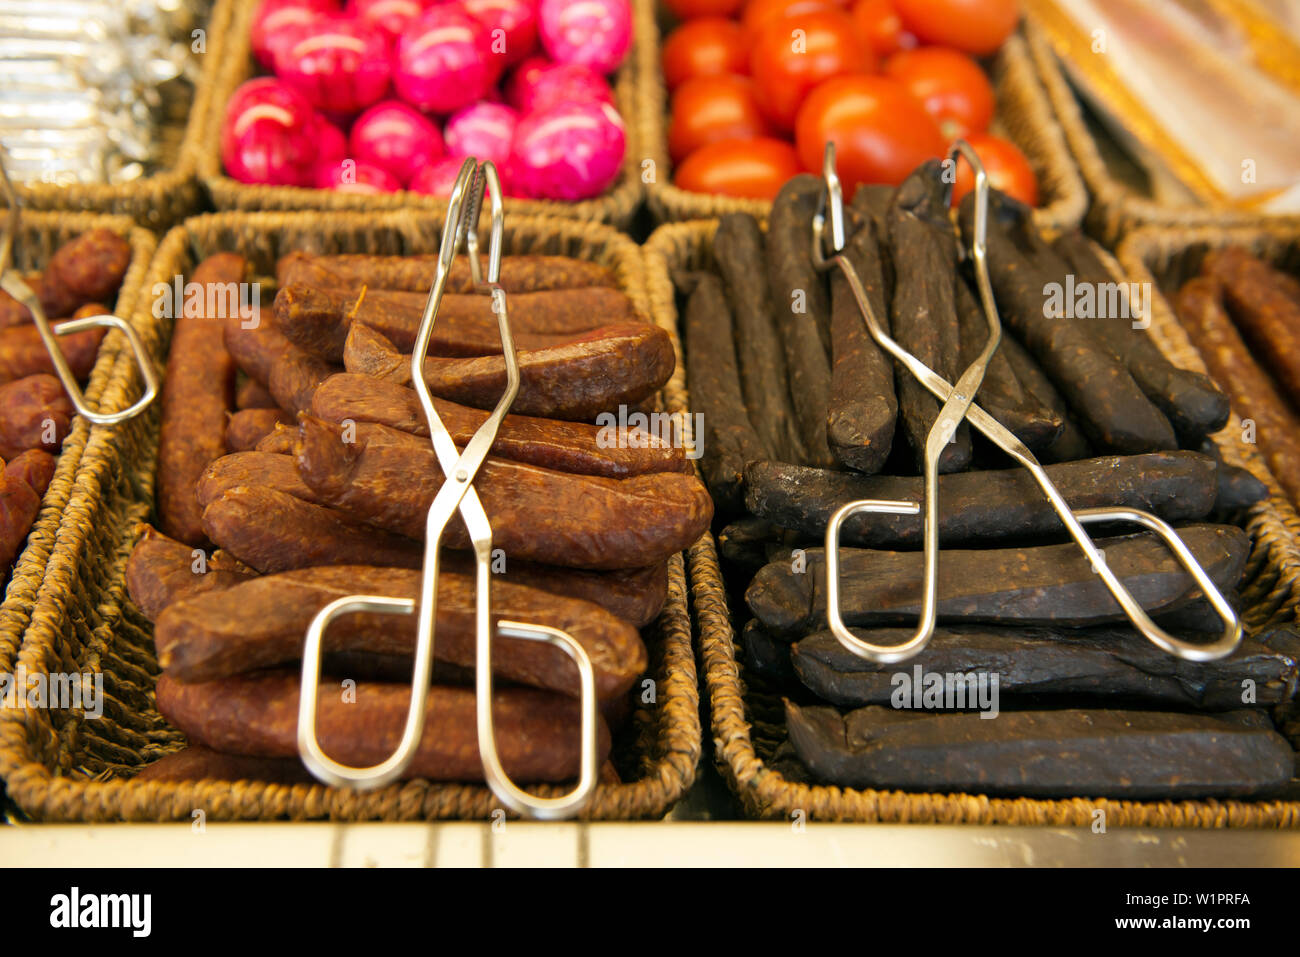 Landjäger, dried and smoked sausages are part of the food offerings at beer ardens, like at the beer garden at the Seehaus in the English Garden in Mu Stock Photo